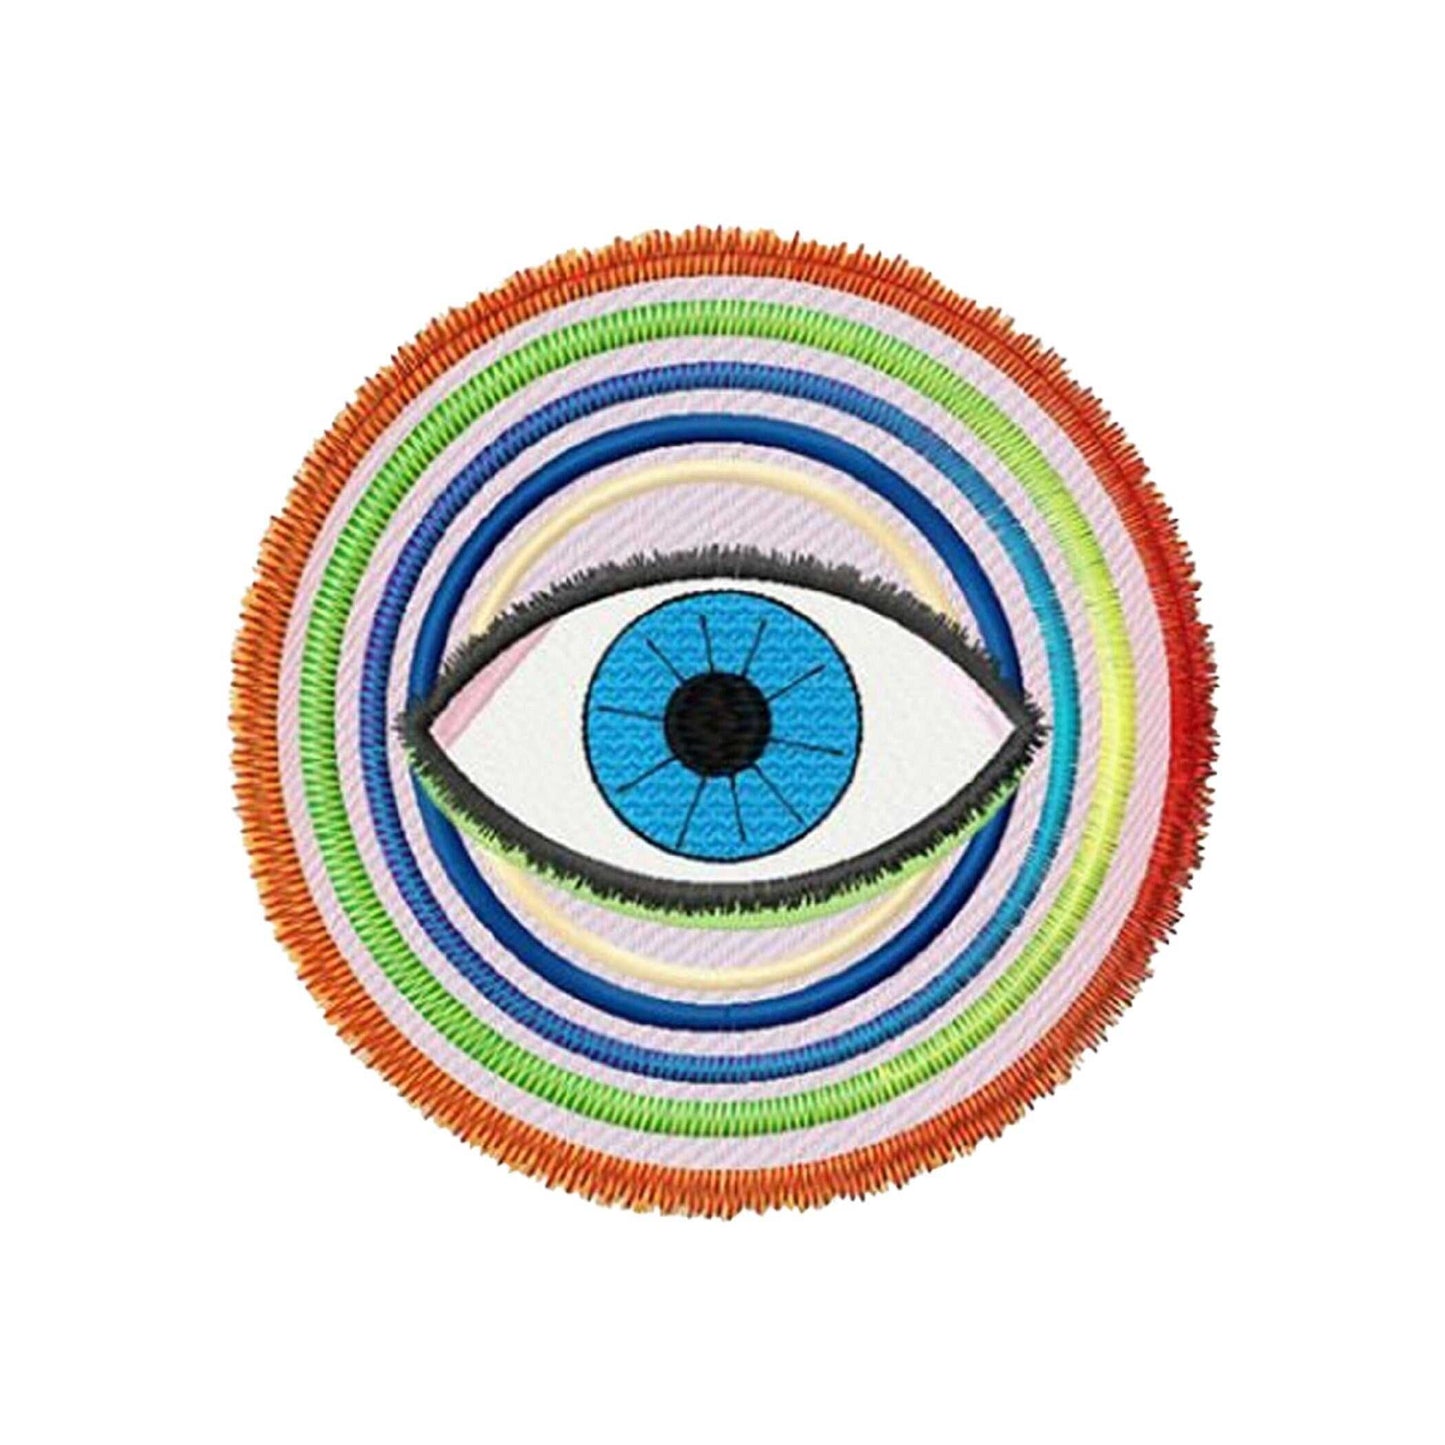 Iron on Patches / Sew on embroidered patches - Indian Eye Iron on Patch Embroidery Patchwork - Spiritual Third Eye DIY Badge for Clothing